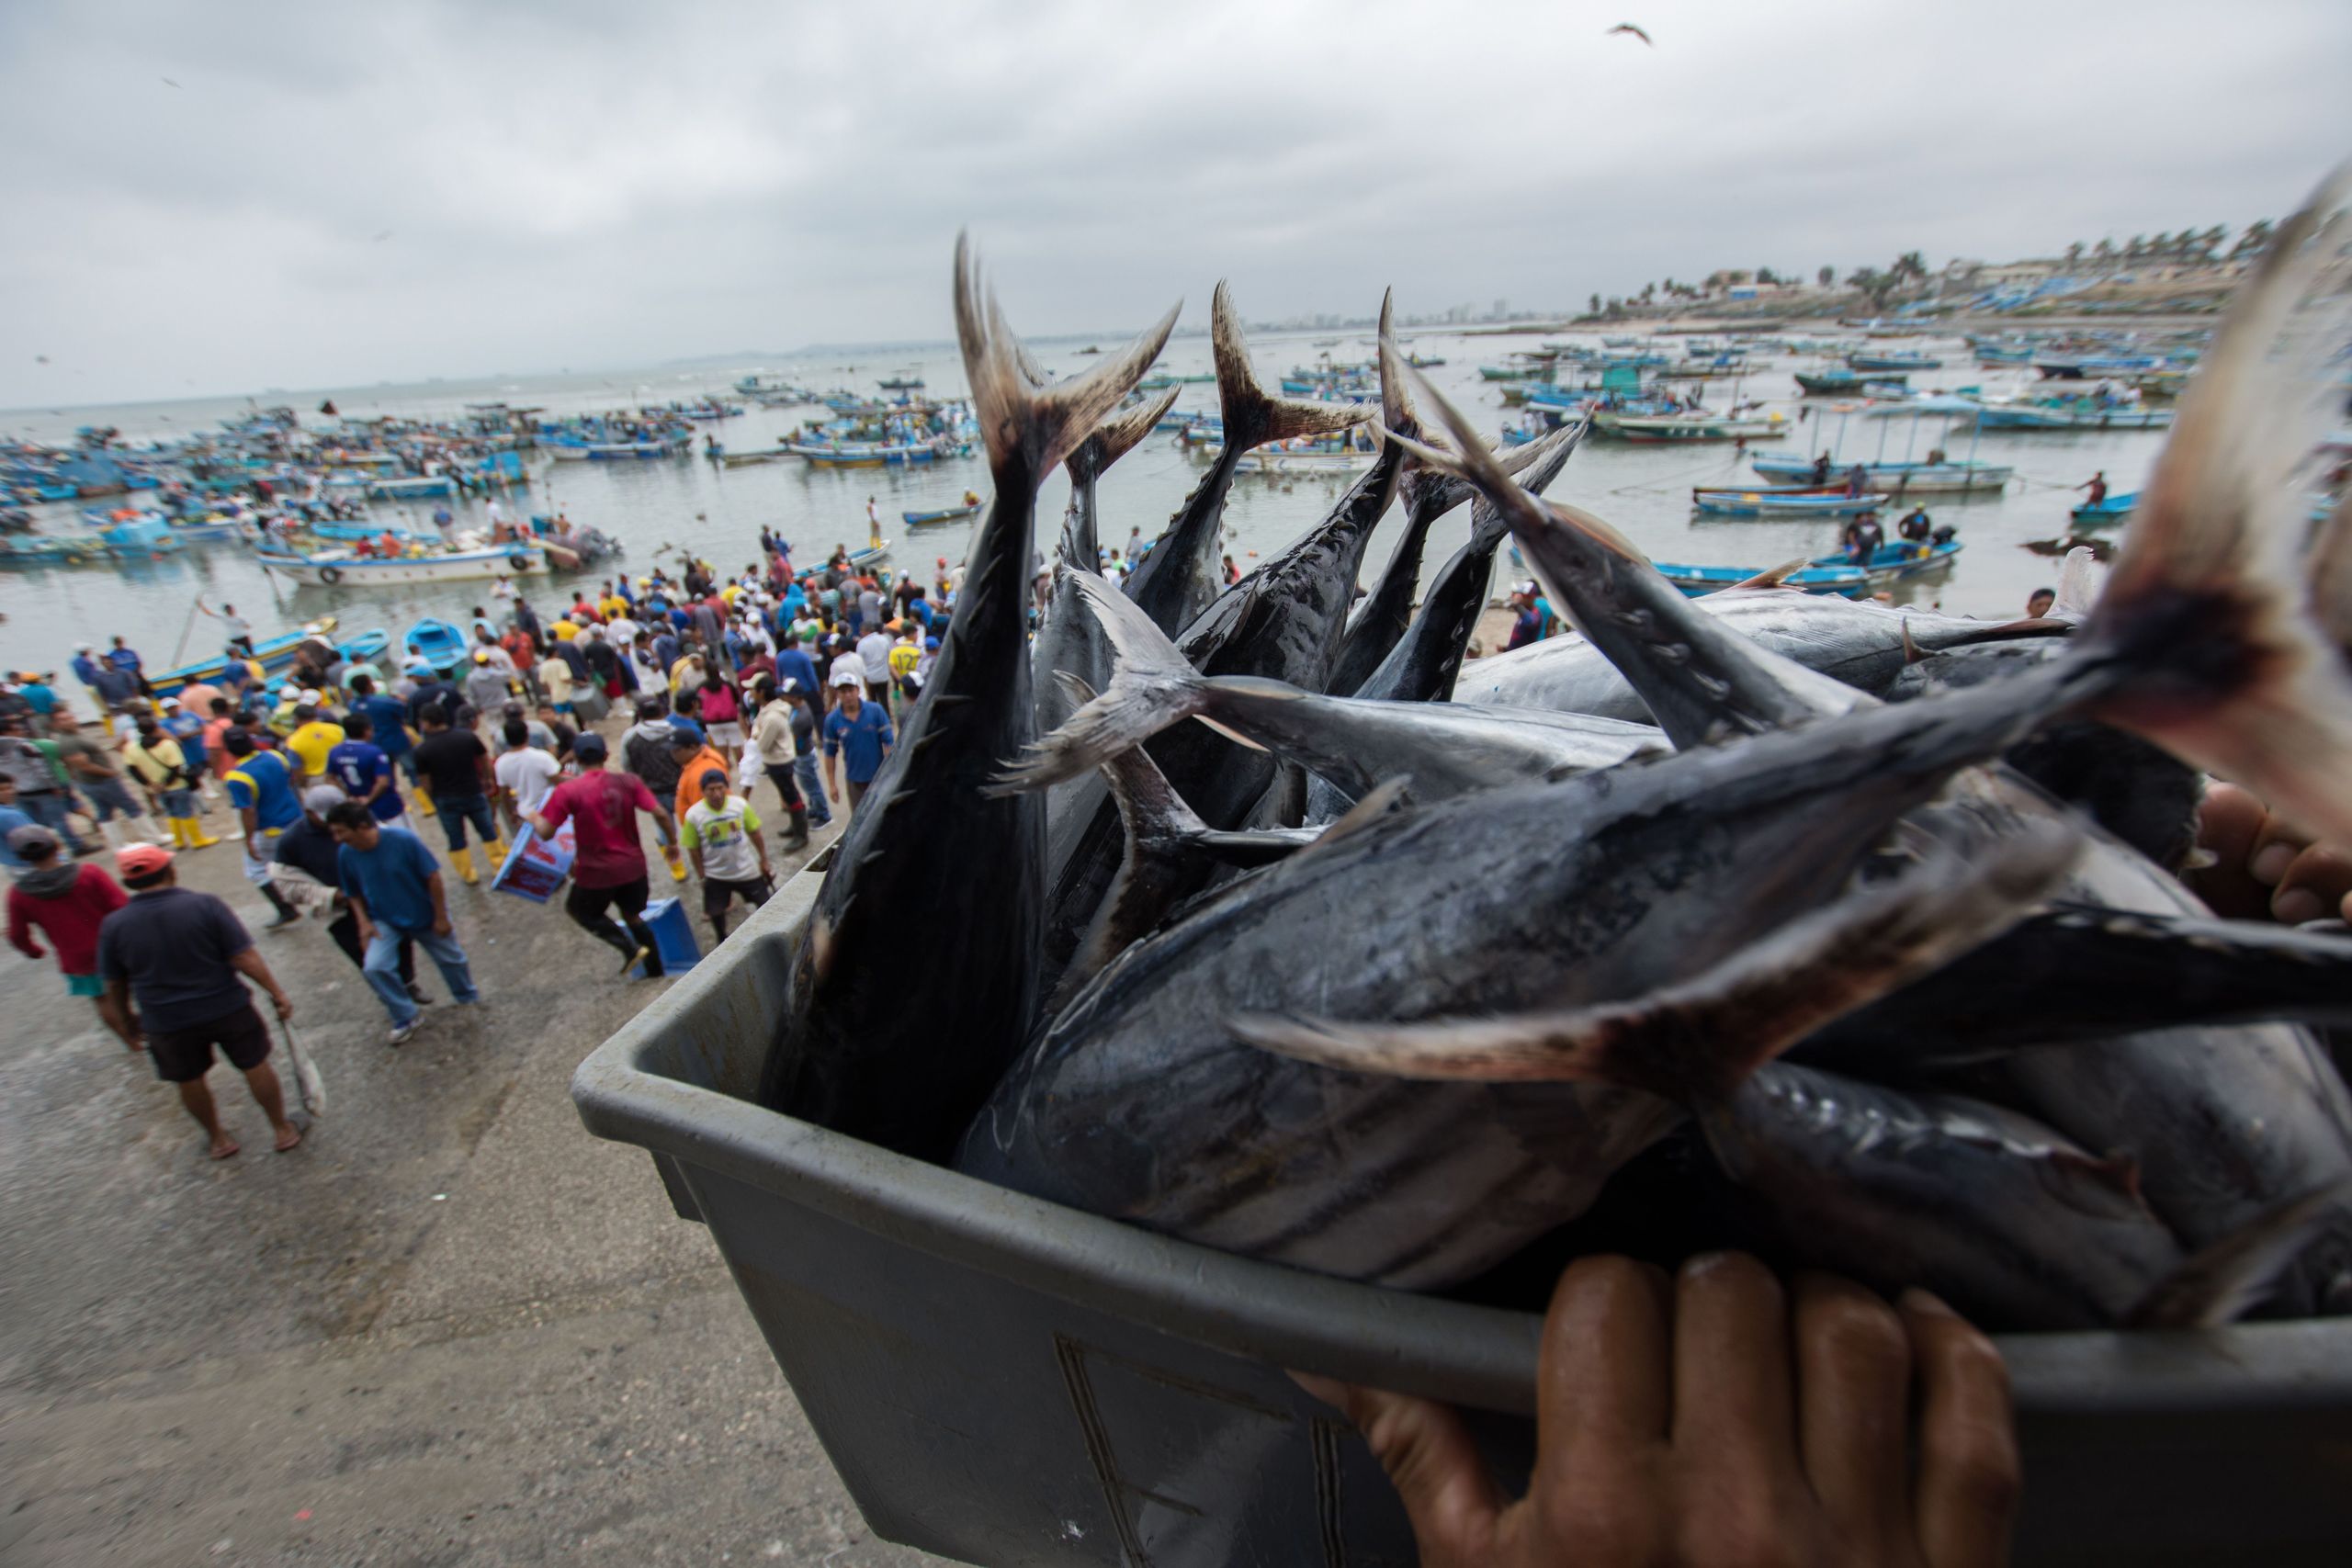 A person carrying a box of fish overhead walking by a bay with many fishing boats and fishermen on the shore